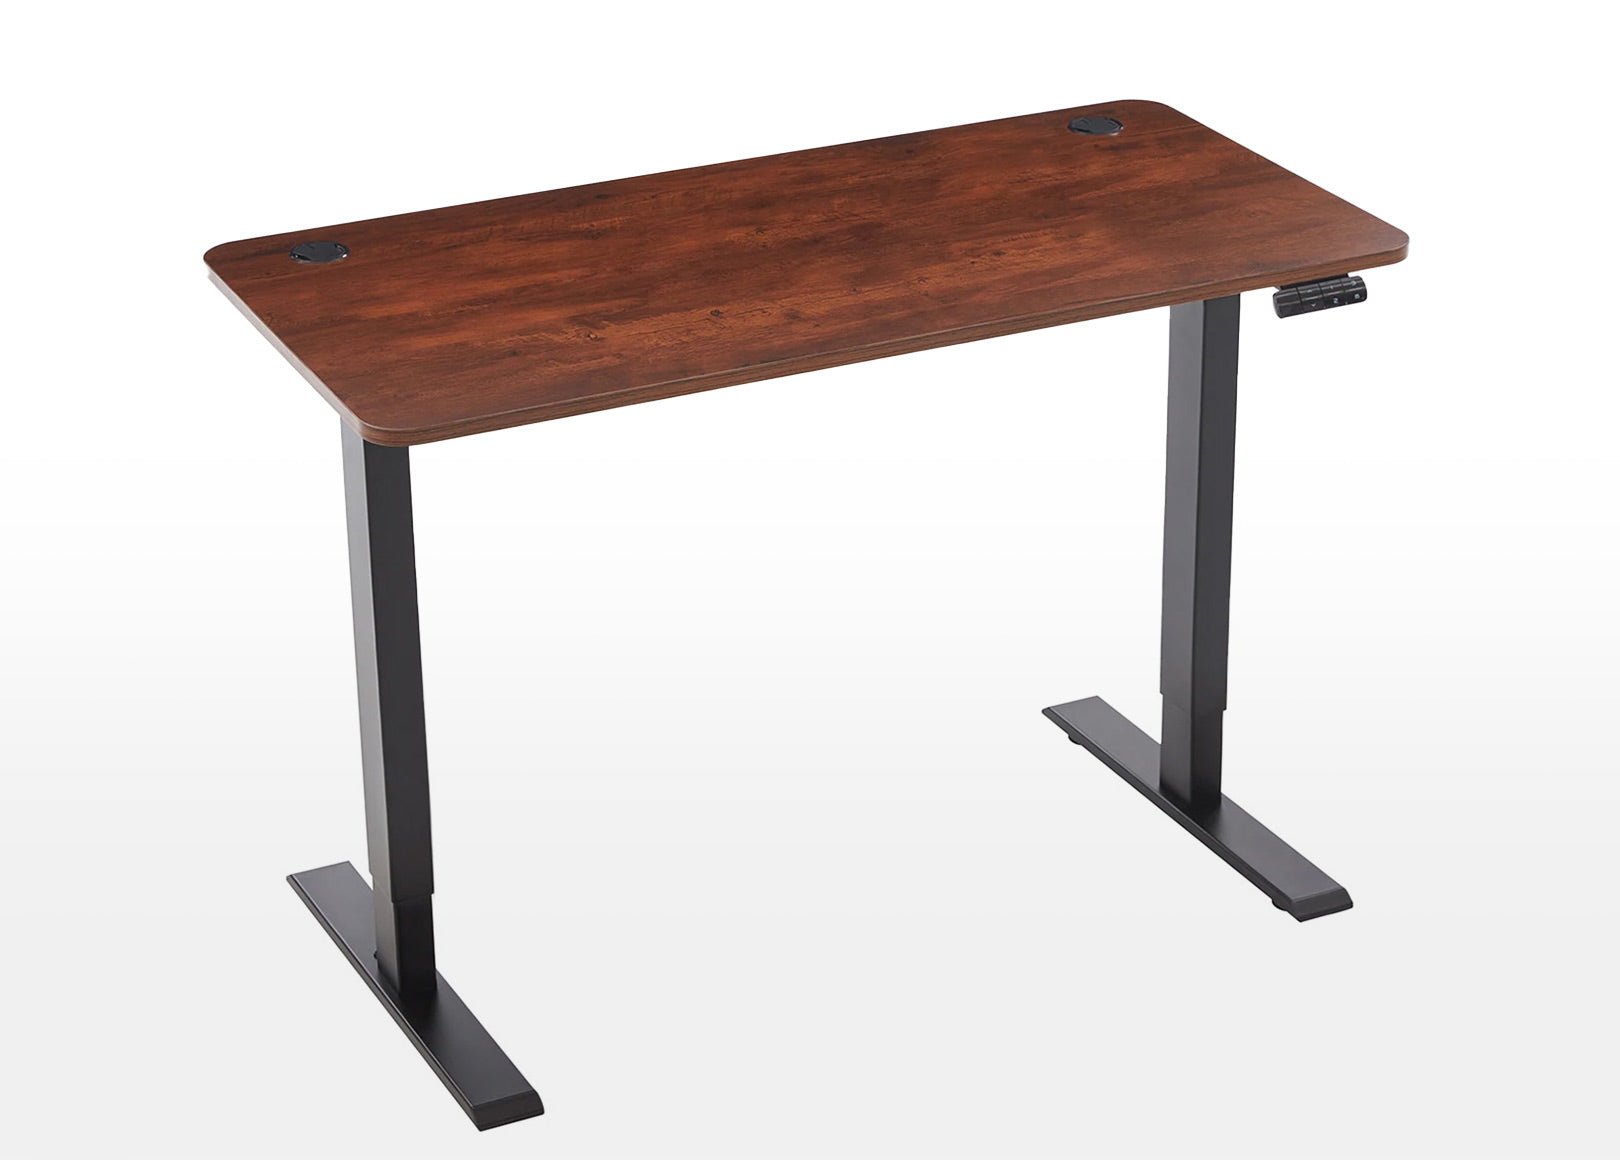 For a touch of rustic charm in your workspace, choose our Rustic Brown Sunaofe Tau2 standing desk. This desk features dual motors for smooth, adjustable height settings, and an ergonomic design that promotes better posture and reduces strain. Experience improved health and productivity with this stylish and functional desk. Shop now for a more comfortable and efficient workday.